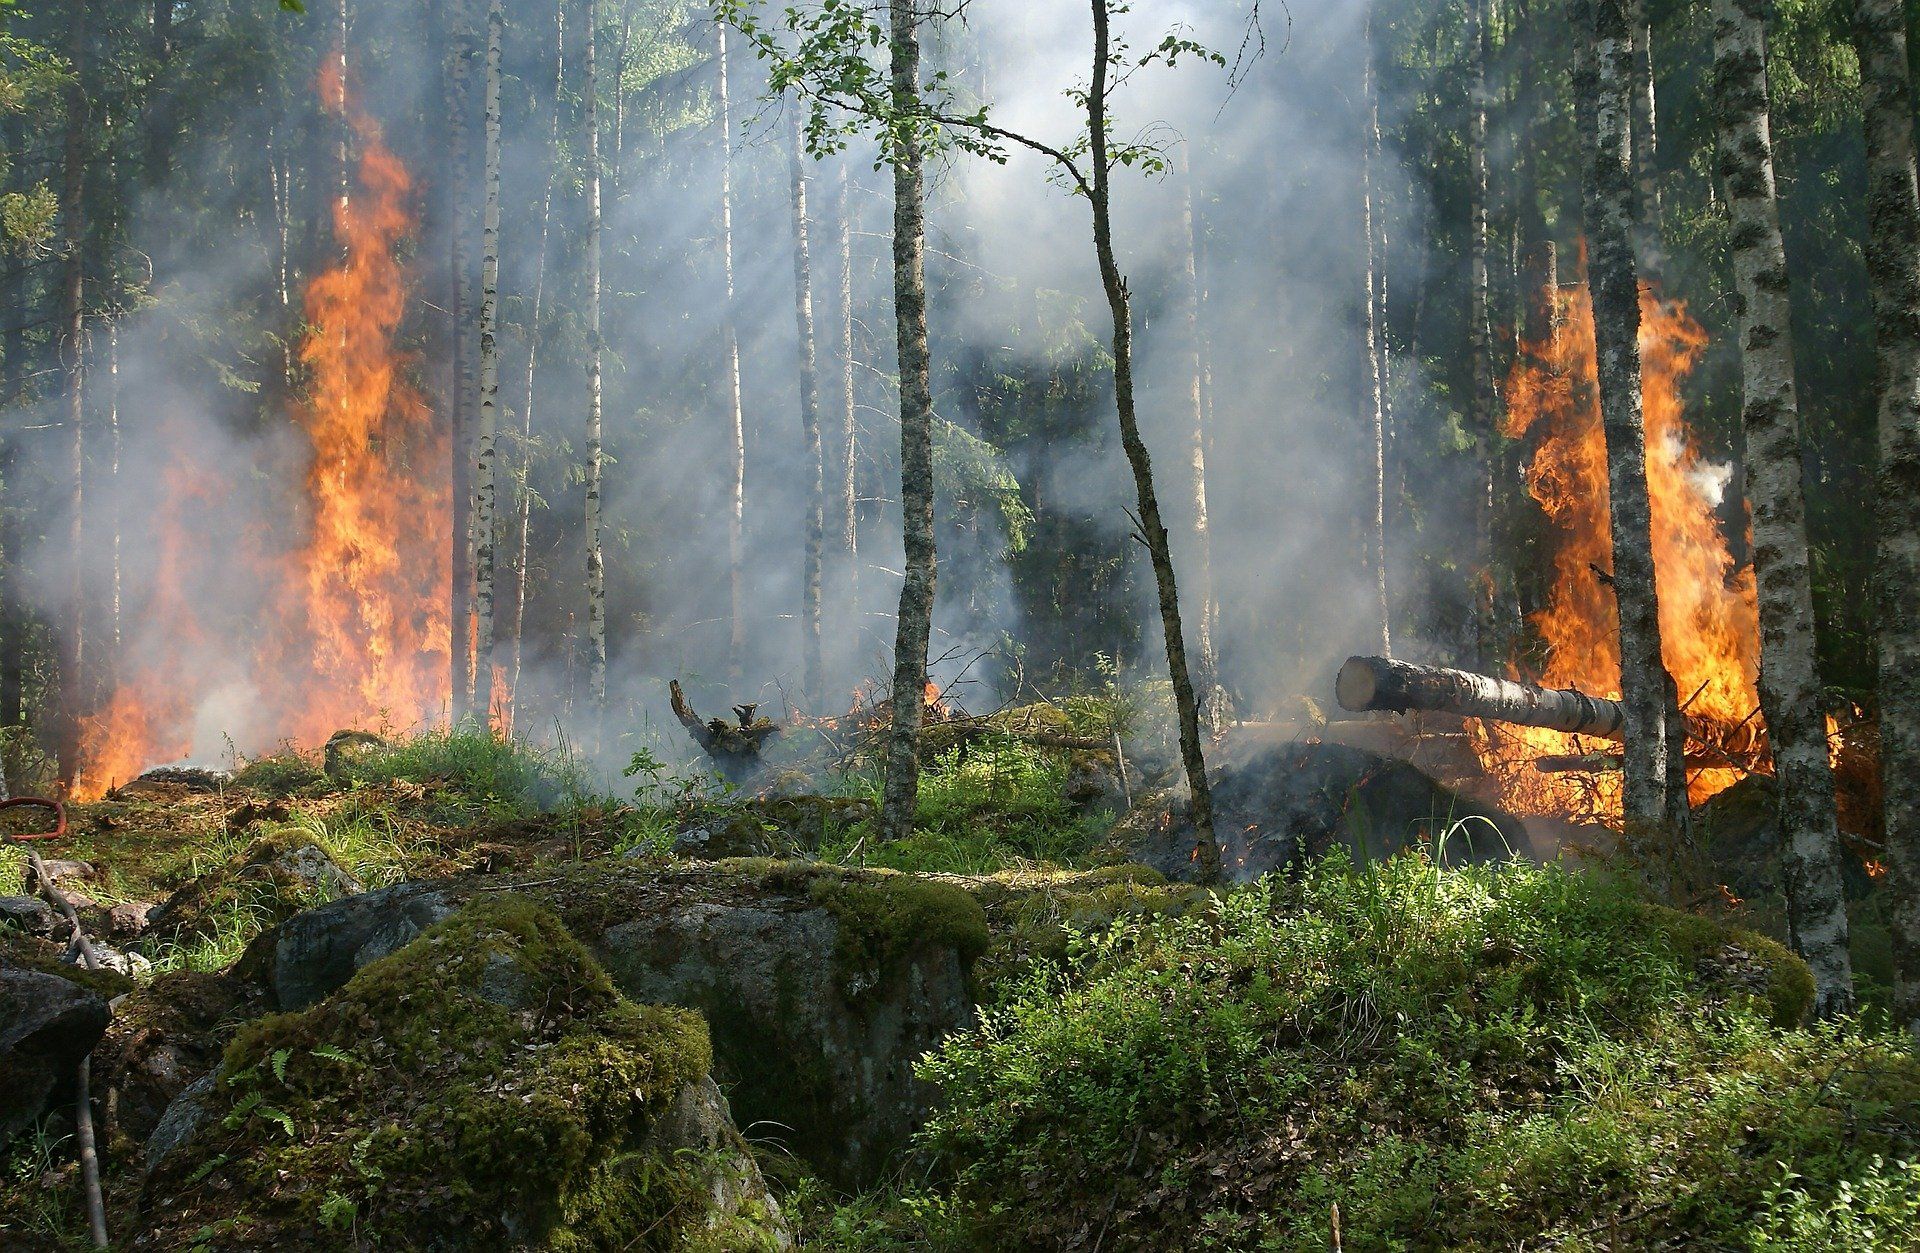 Barbecue during wildfire season costs Russian governor 3,000 rubles